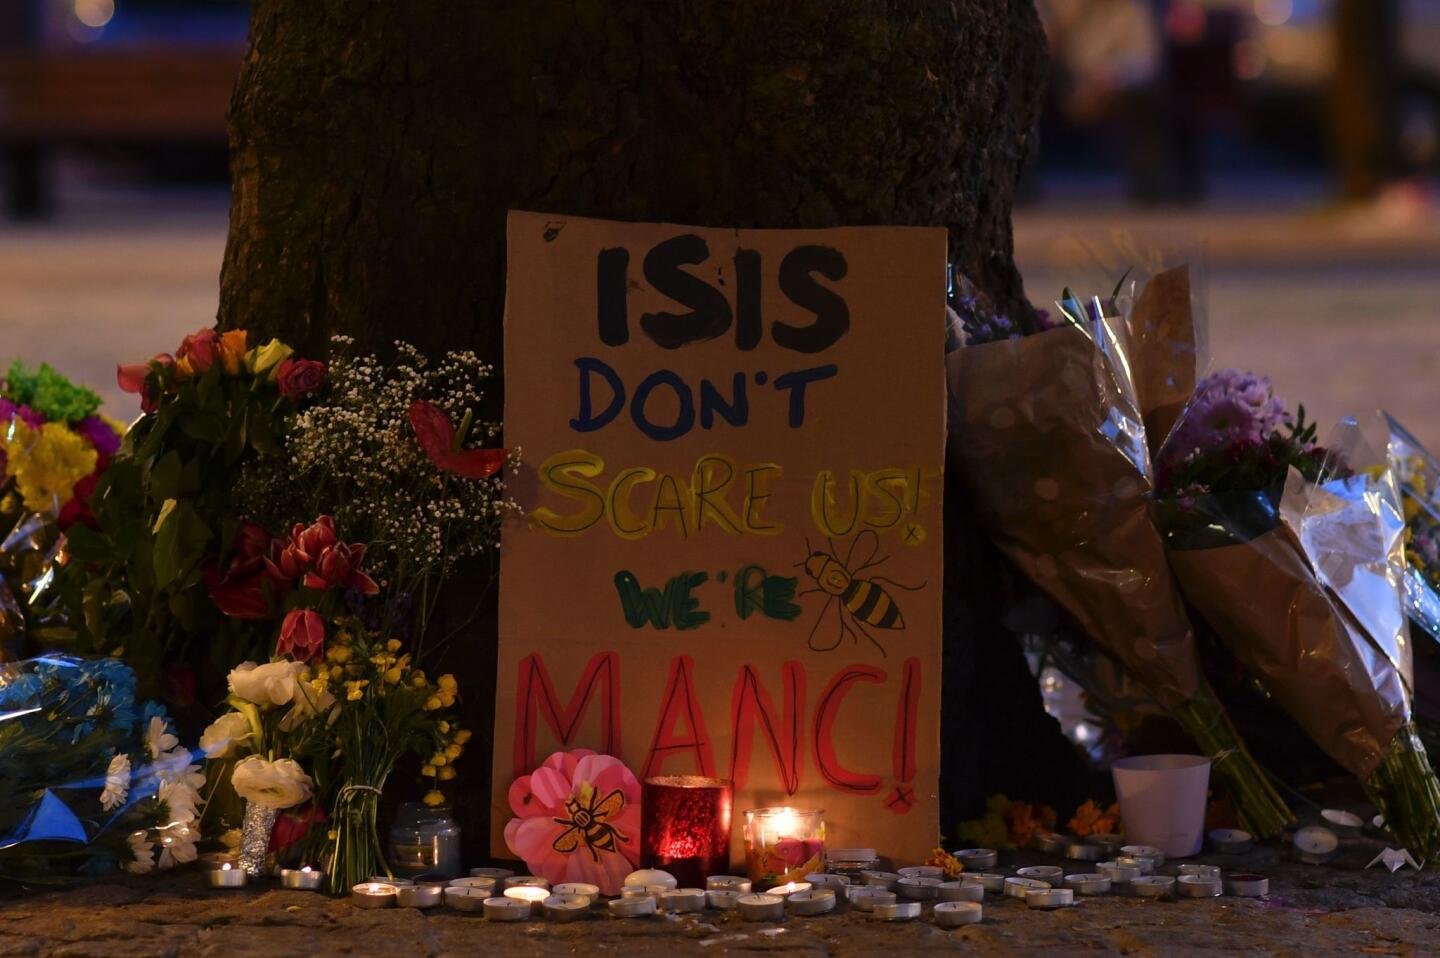 Messages and floral tributes are seen in Albert Square in Manchester, England, on May 23, 2017, in solidarity with those killed and injured in the previous day's terror attack at an Ariana Grande concert.